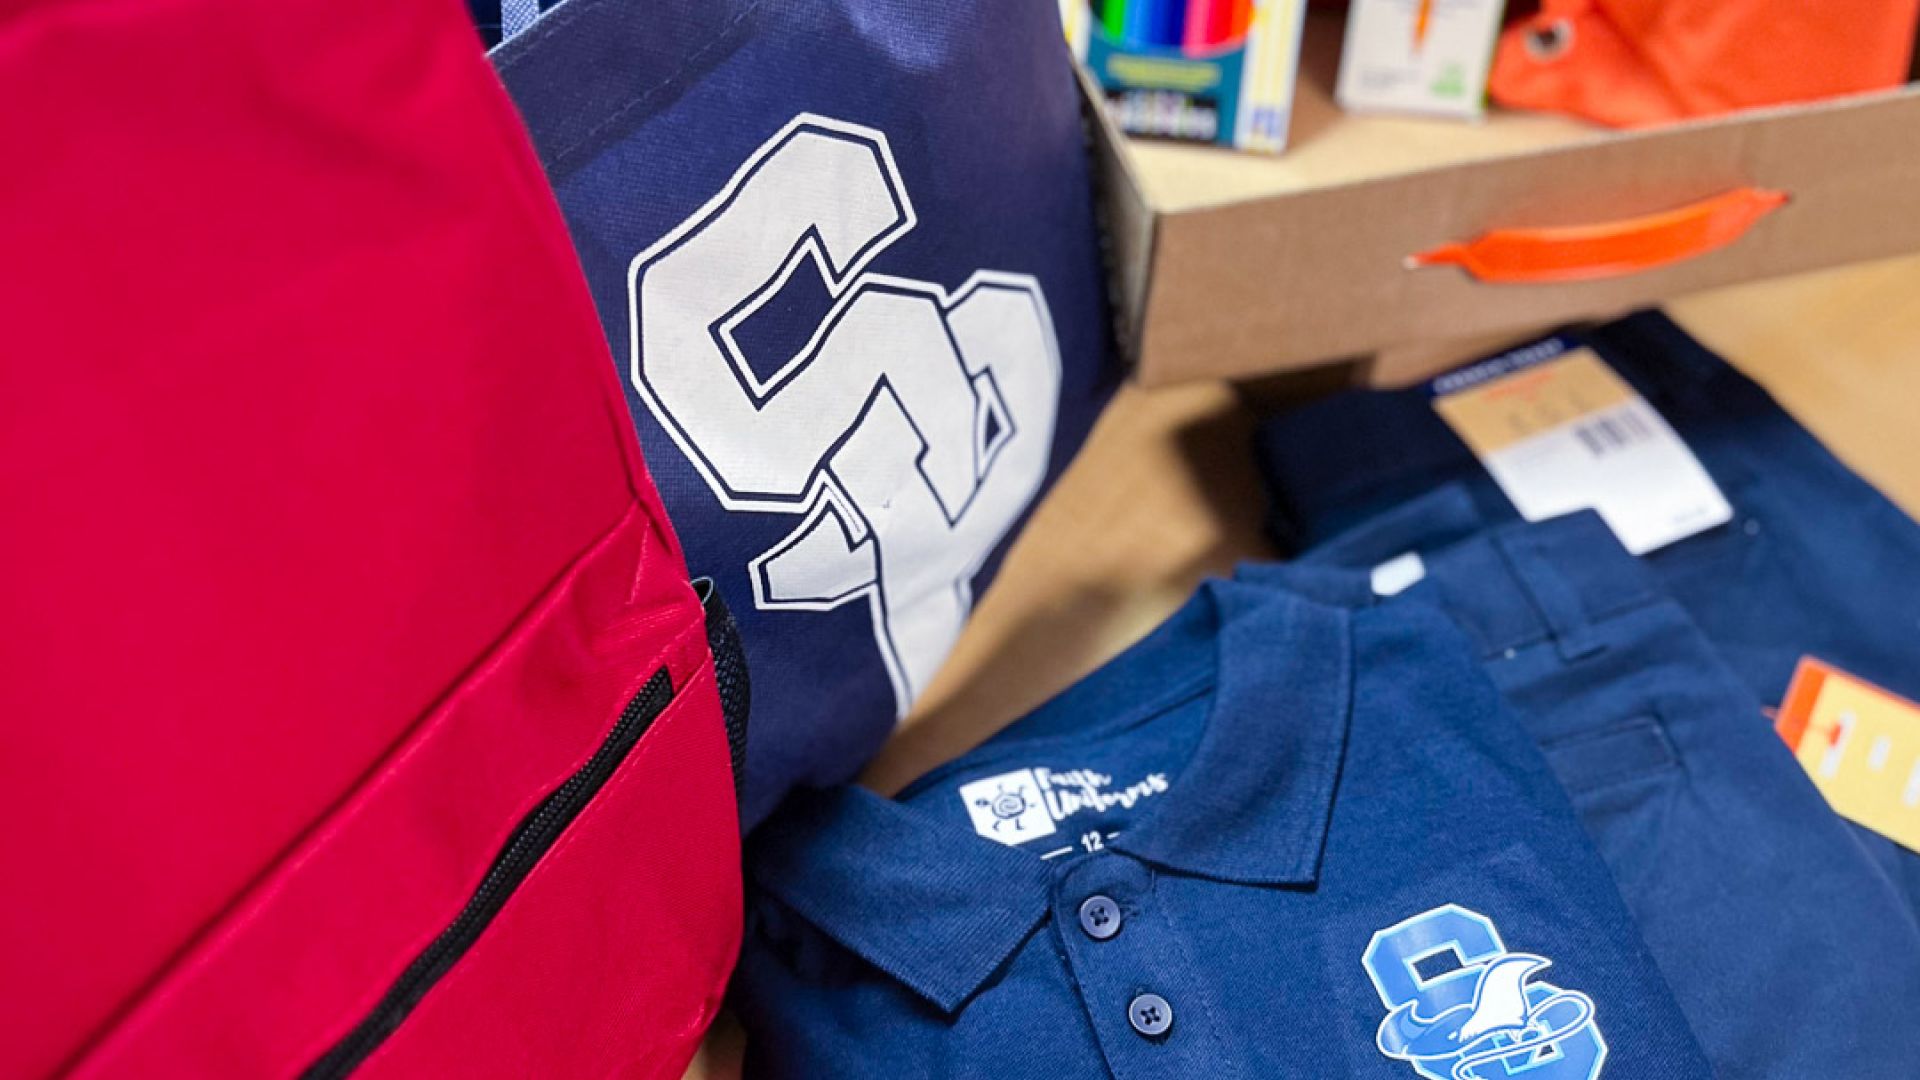 Scholarship Prep Distributes Back-to-School Essentials to Students and Families Experiencing Homelessness